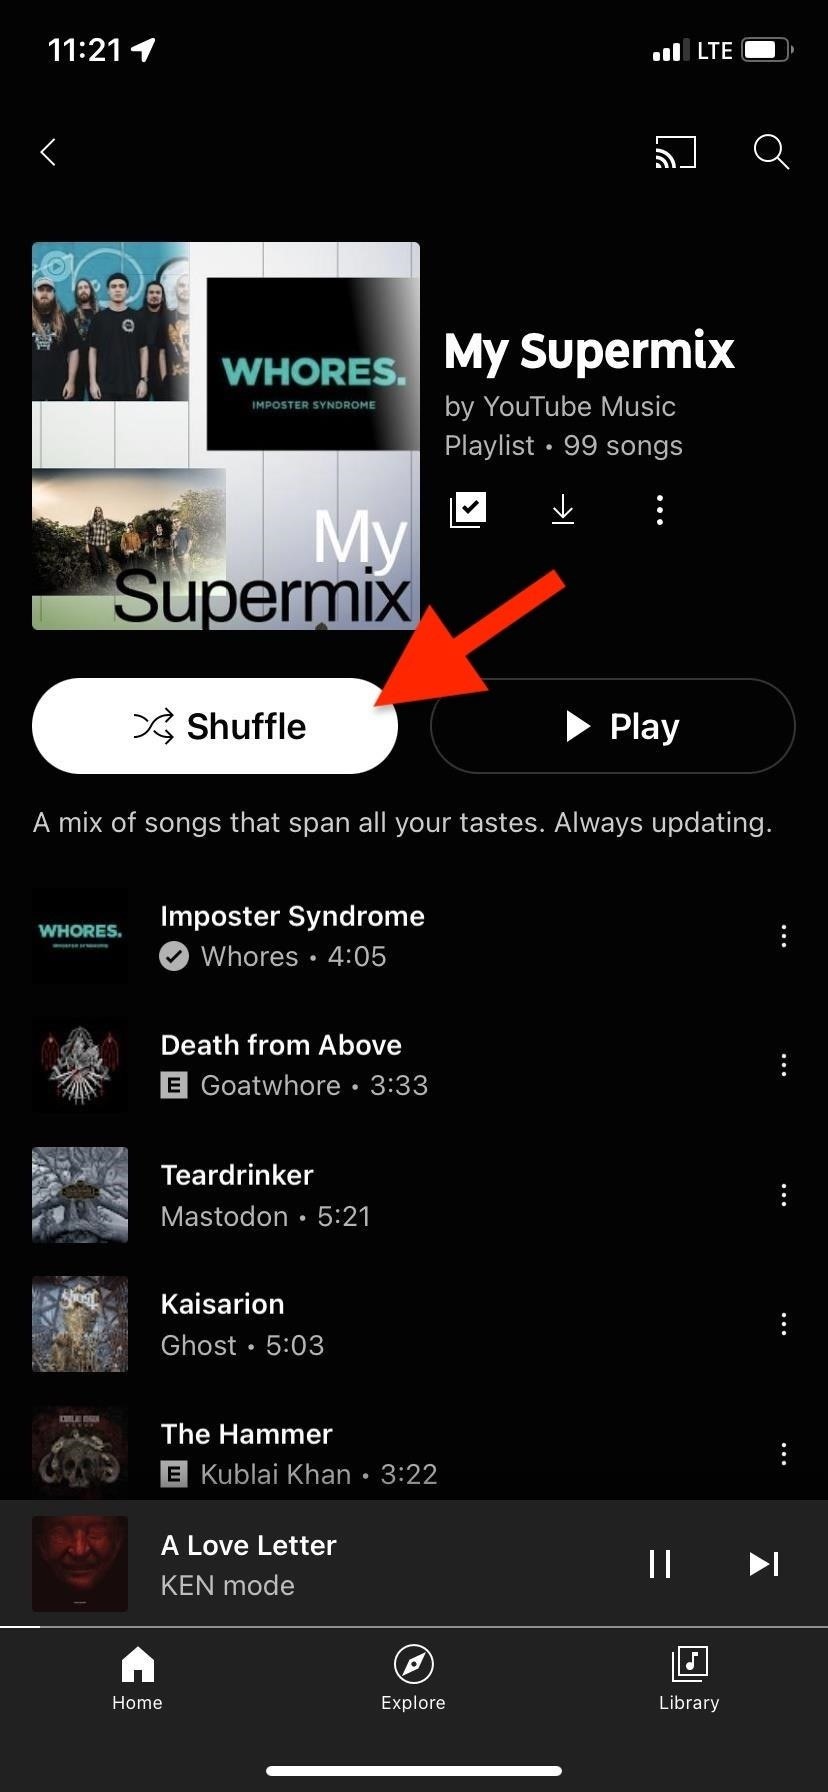 How to Shuffle YouTube Music Playlists in the New Playlist UI